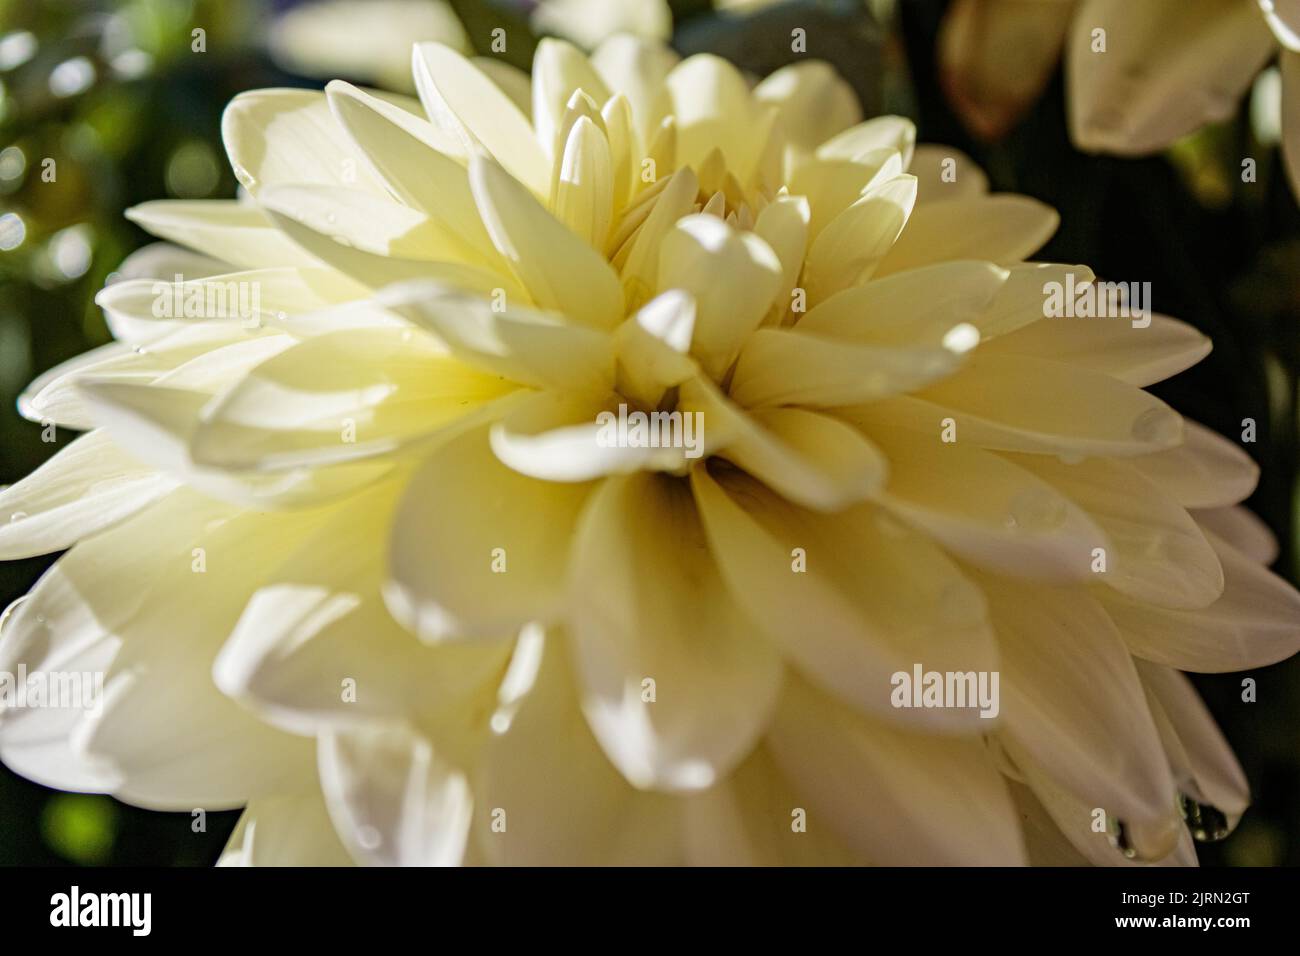 A macro-shot of a Lemon yellow Dahlia flower's petals, with green foliage in the background. Stock Photo